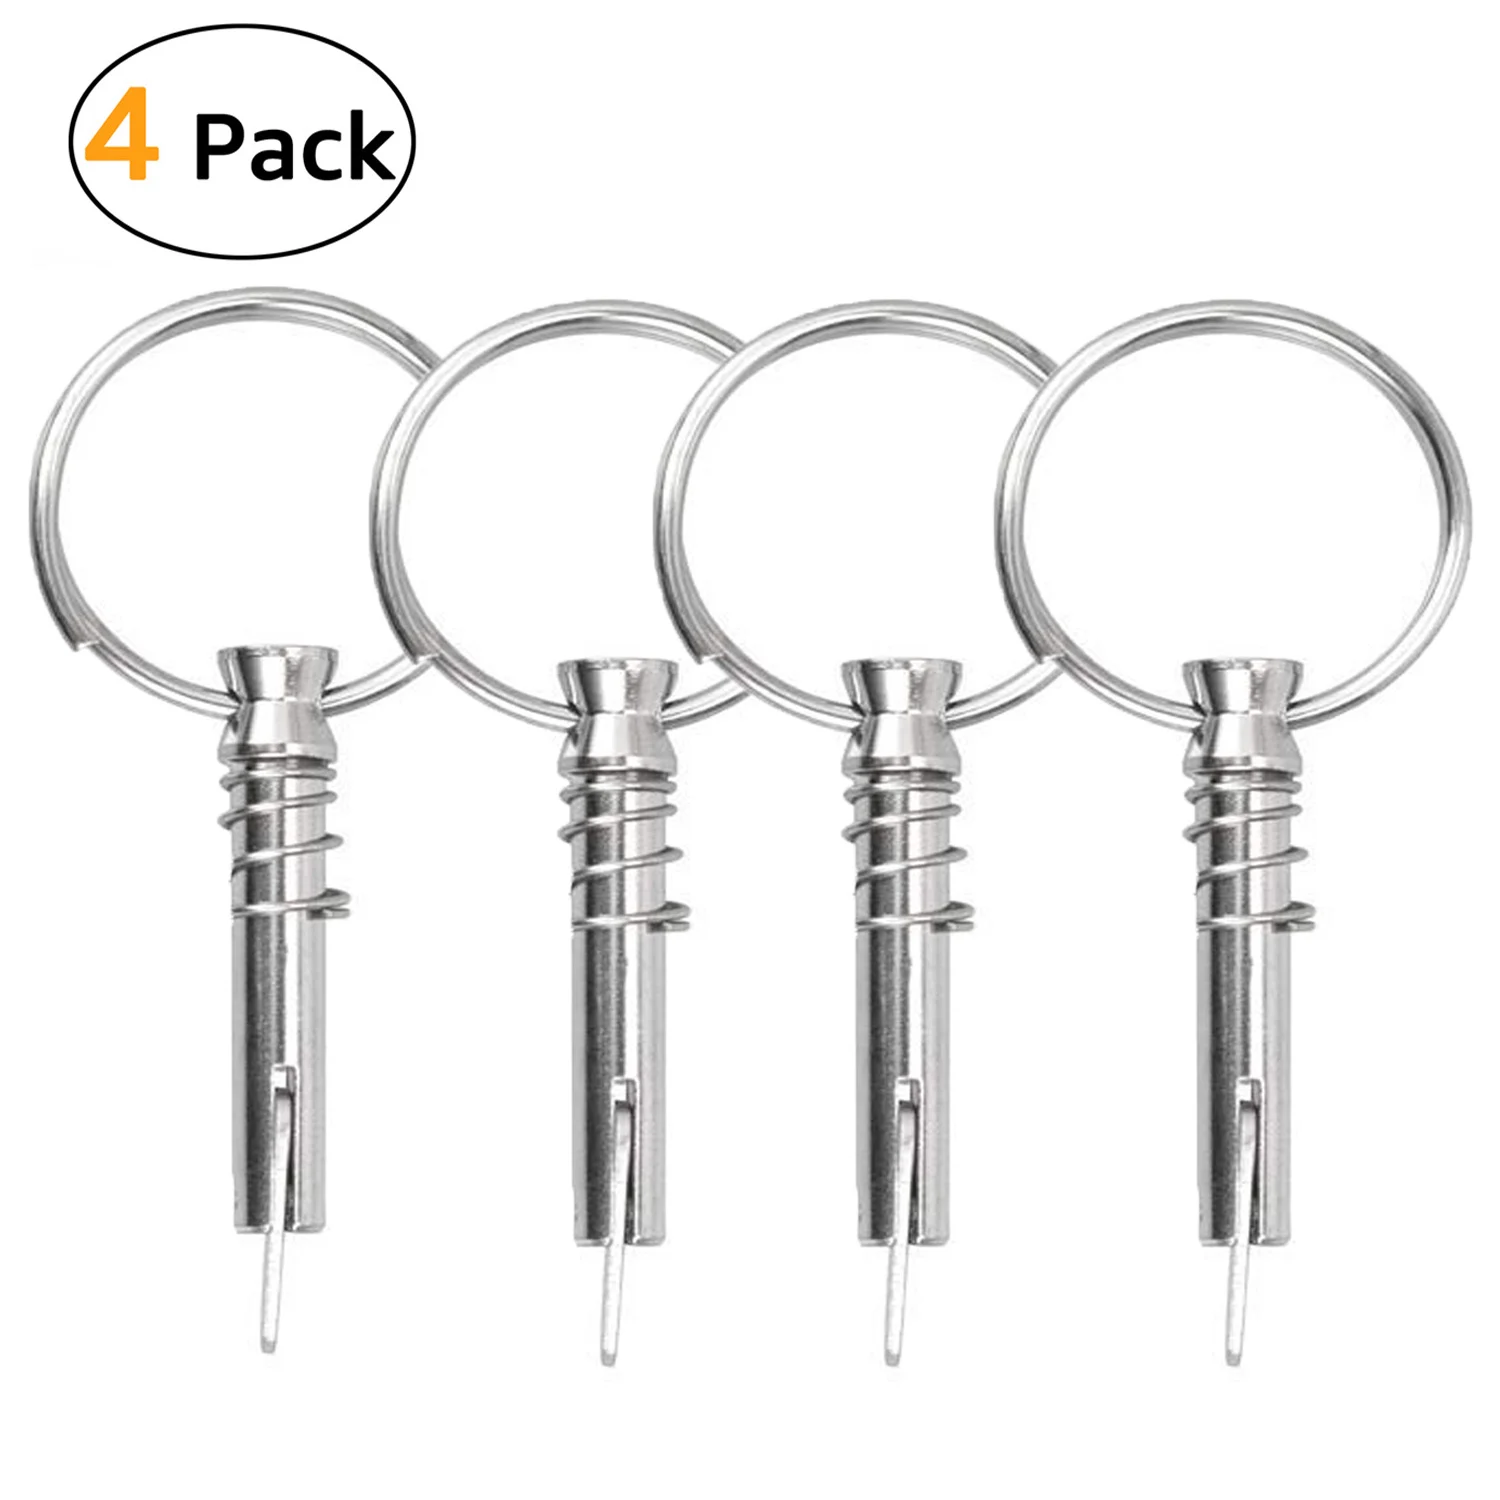 Quick Release Pin, Bimini Top Pin  With Ring, Diameter 1/4 Inch, Bimini Top Deck Hinge Marine Hardware  (4 or 10 Pcs) 3 pack tactical belt military riggers belts for men heavy duty quick release metal buckle with extra molle key ring holder gears